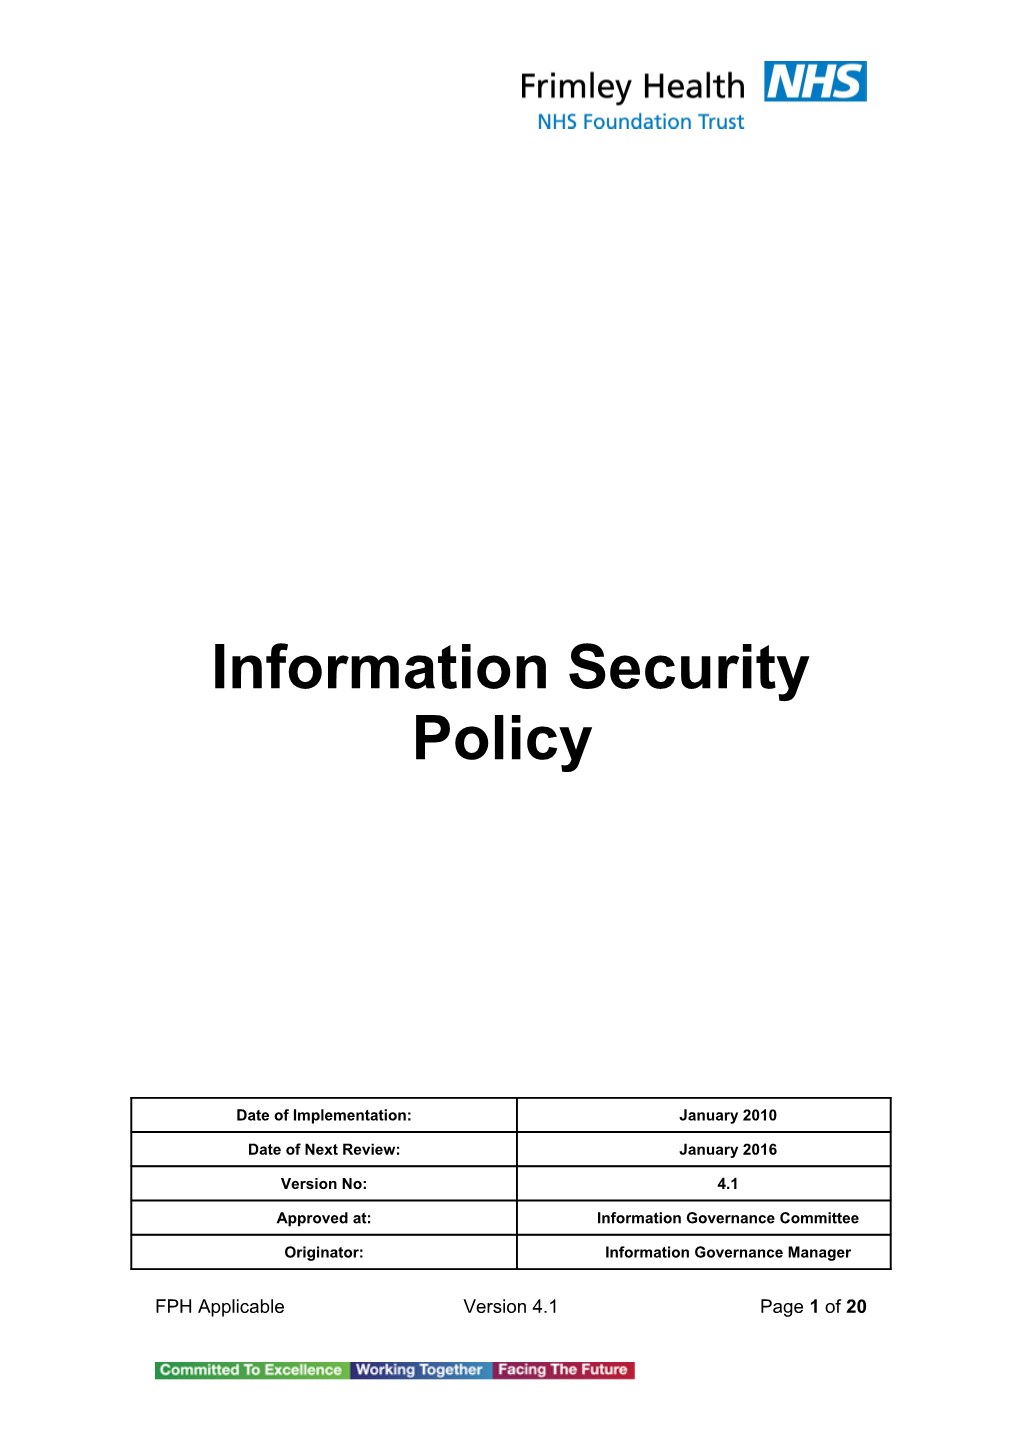 Policy - Information Security Policy V4.1